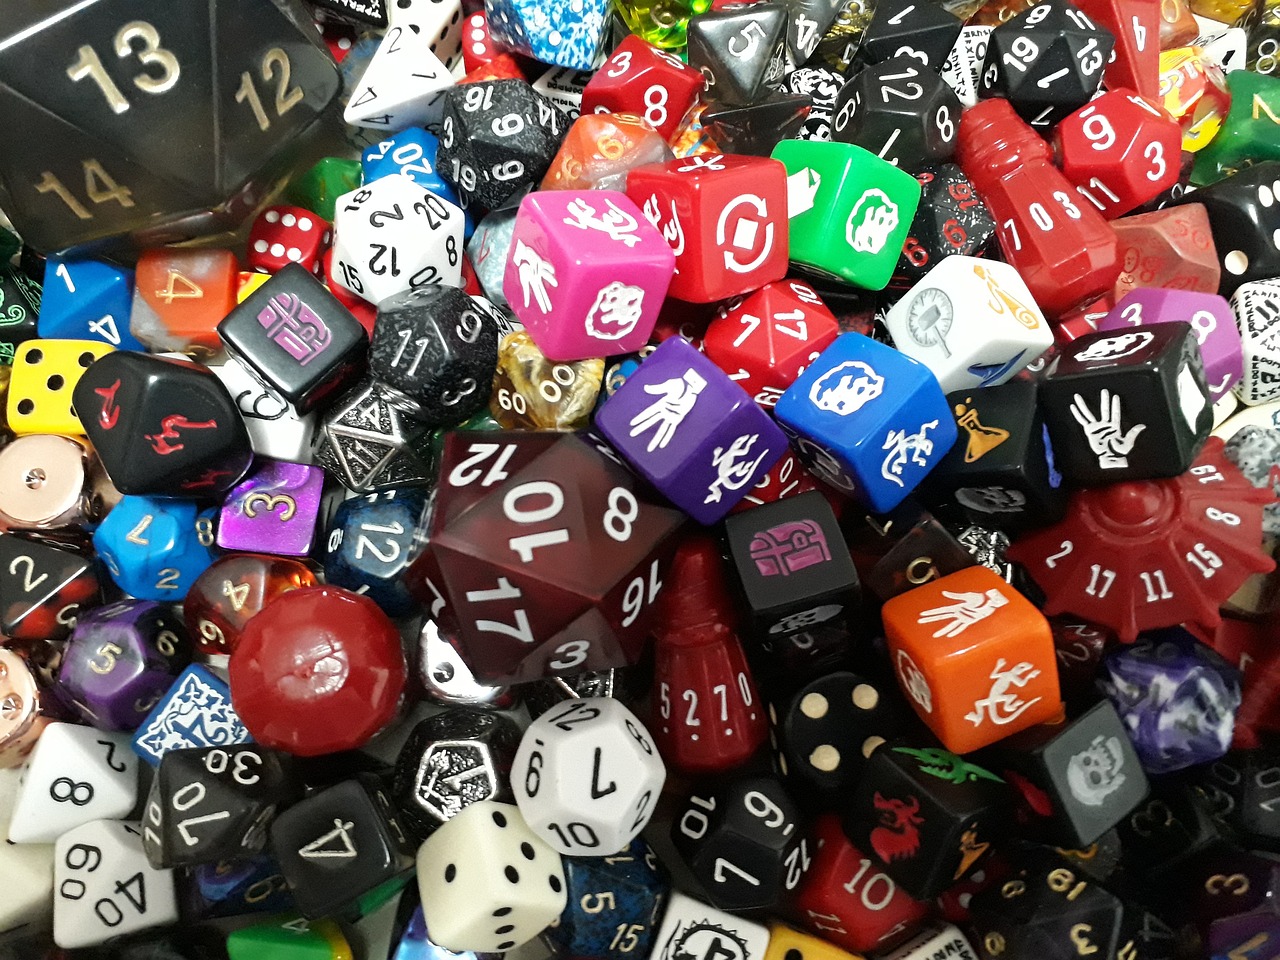 A colorful pile of tabletop gaming dice